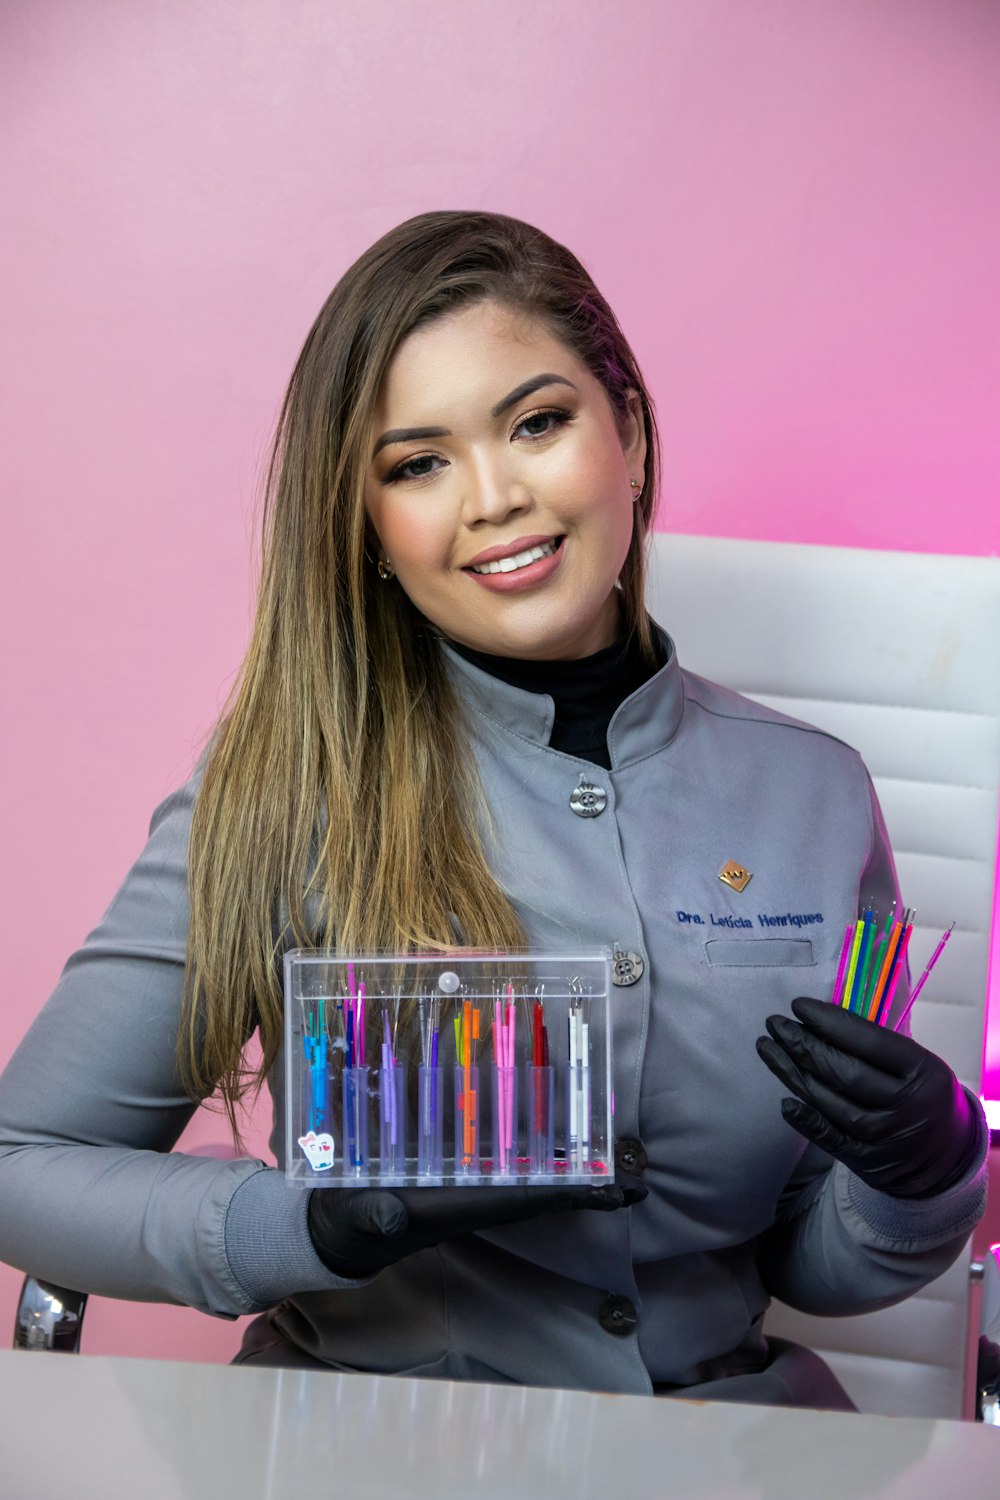 a woman sitting at a desk holding a box of colored pencils